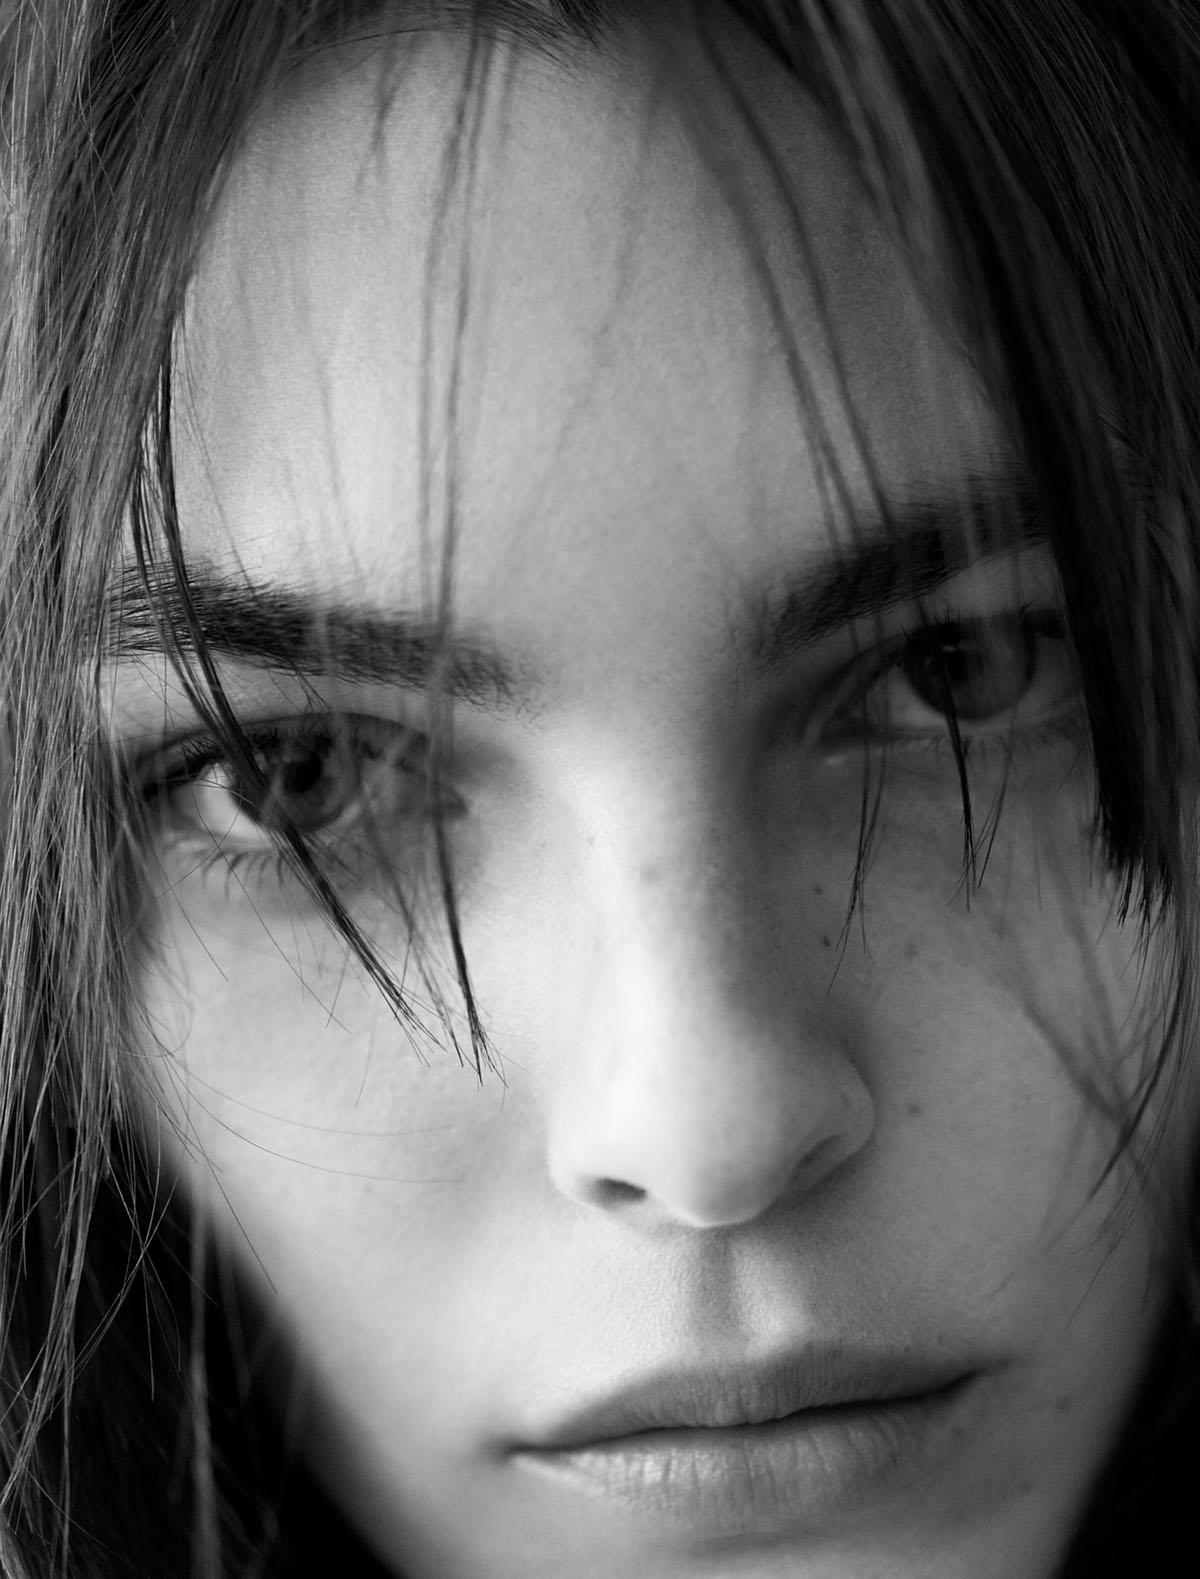 Vittoria Ceretti covers Document Journal Summer Pre-Fall 2021 by Willy Vanderperre